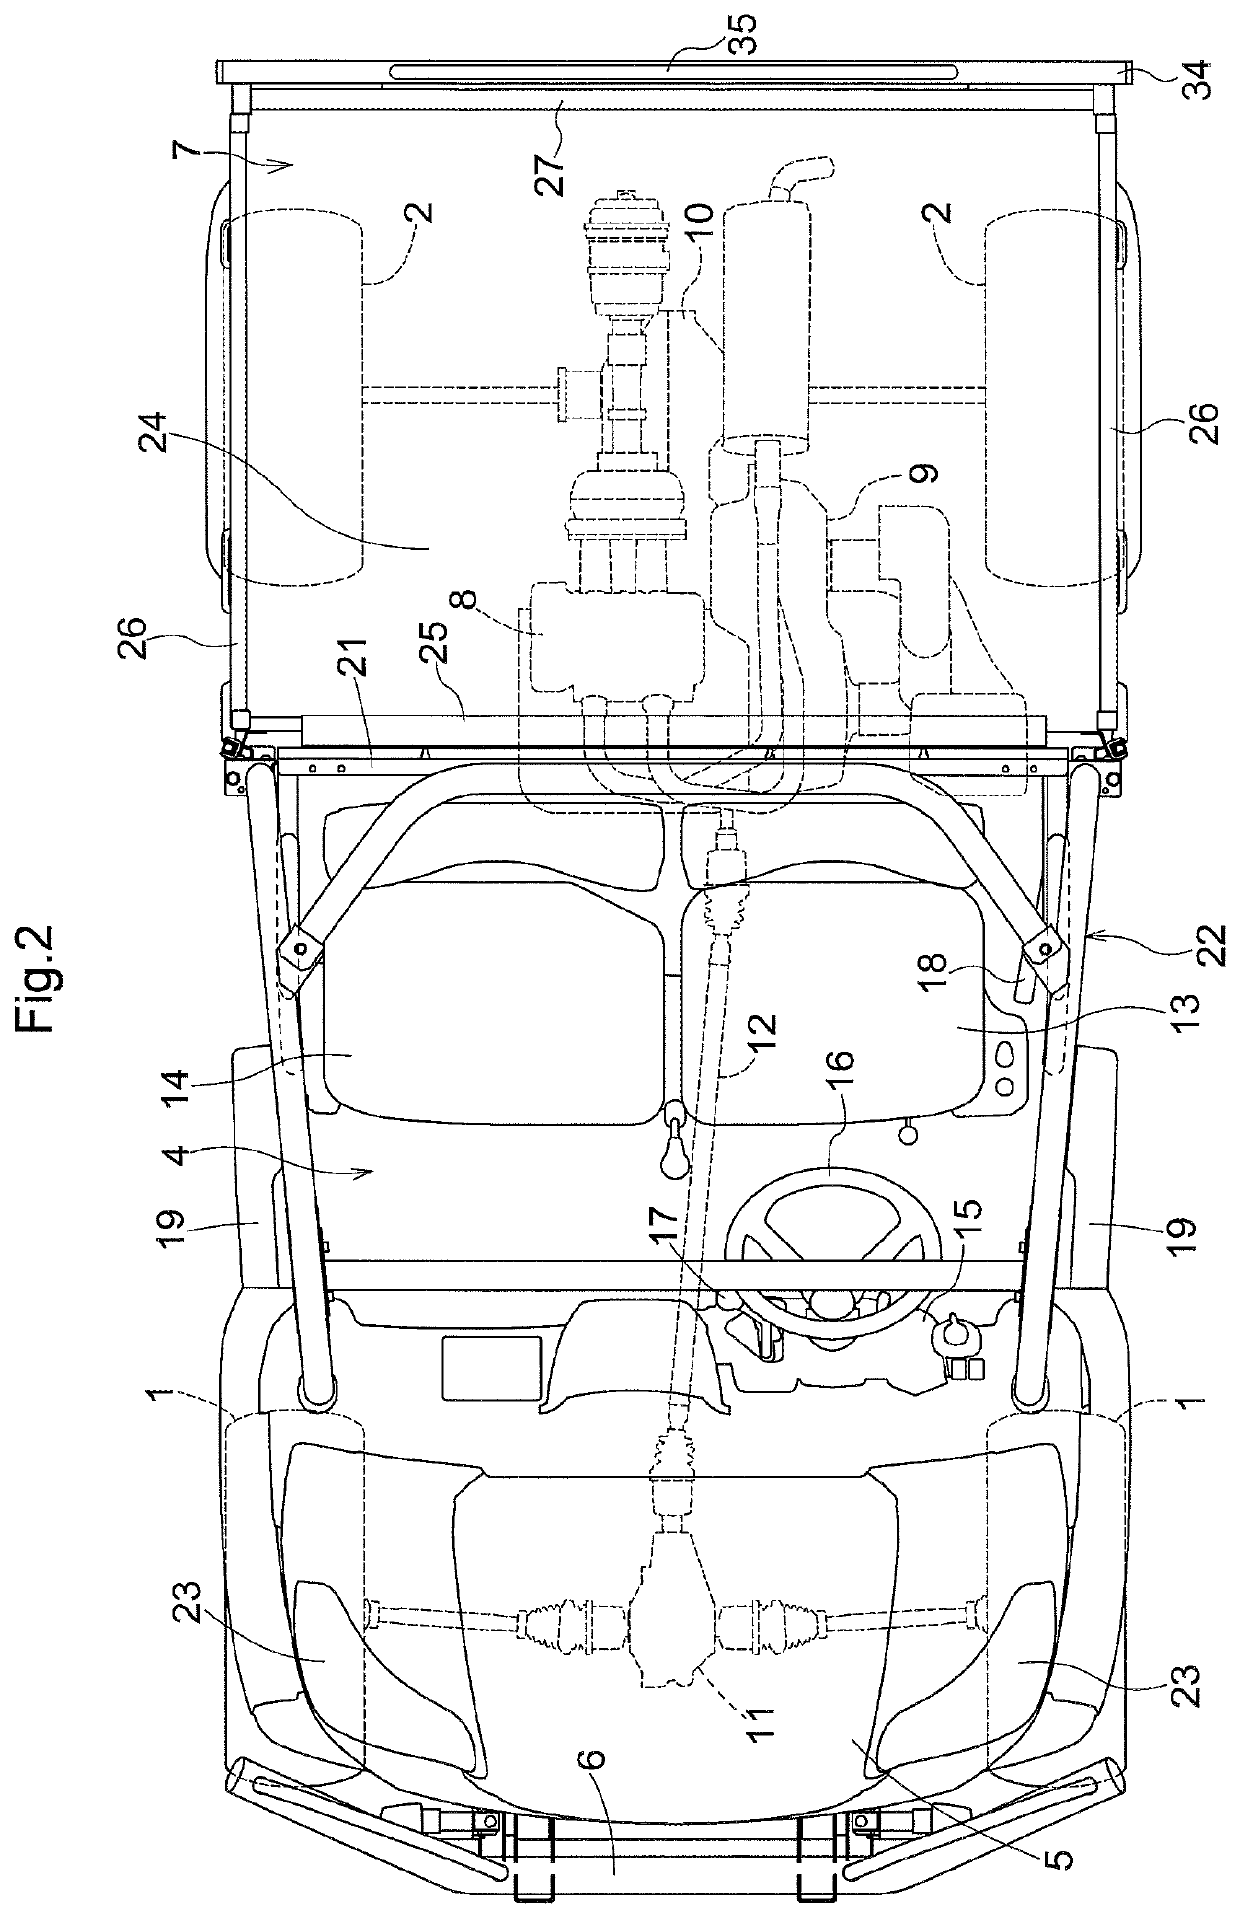 Vehicle having a load carrying deck and attachment device for the same